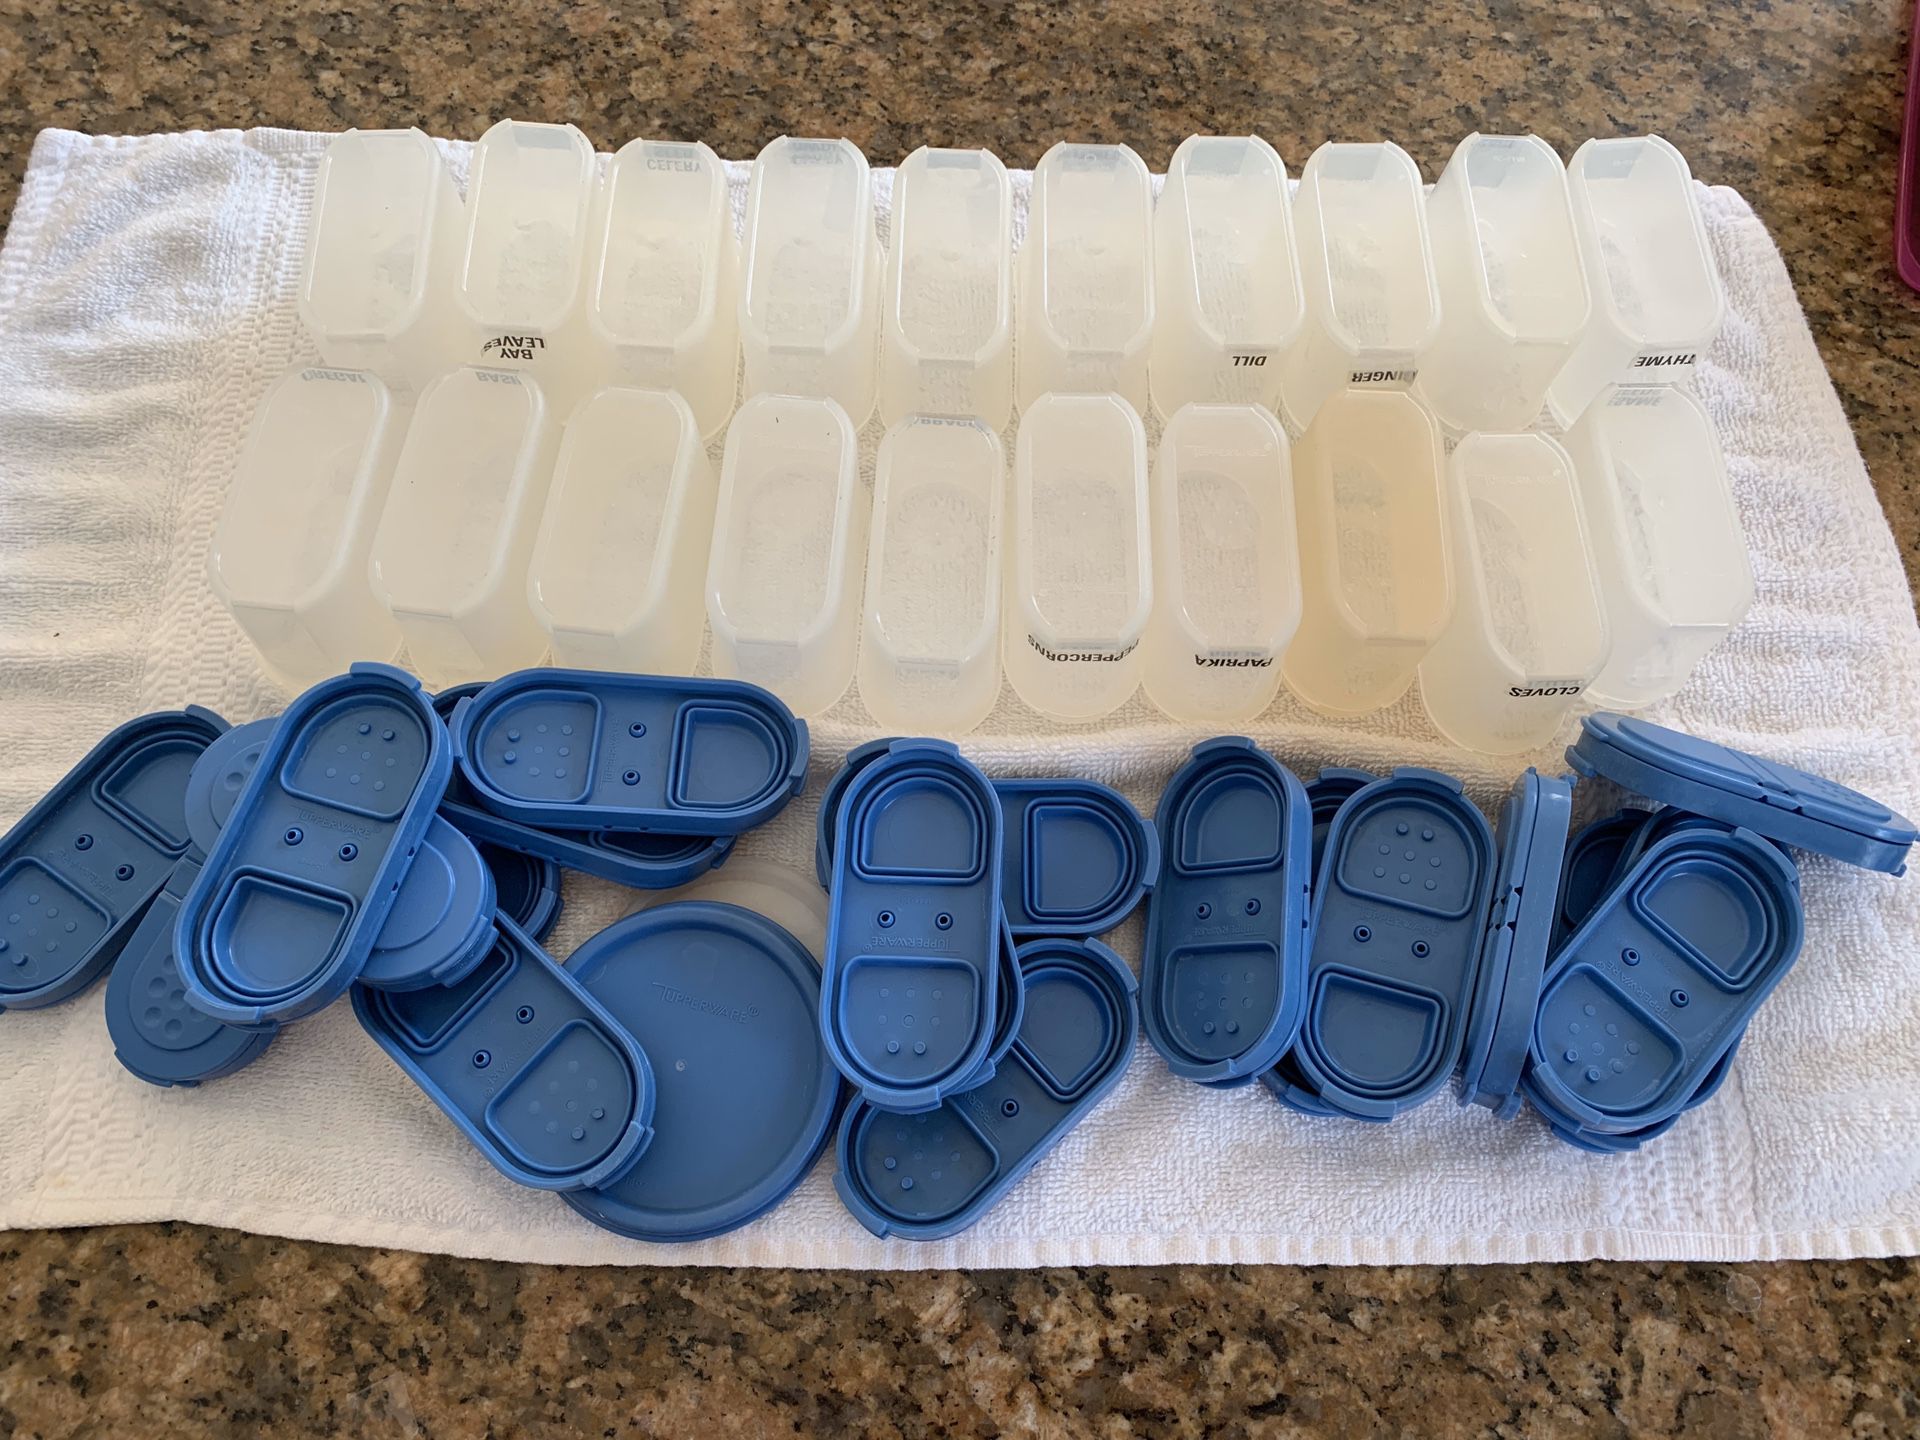 Vintage Tupperware Spice Organizer Containers Shakers LOT OF 20 w/ lids BLUE